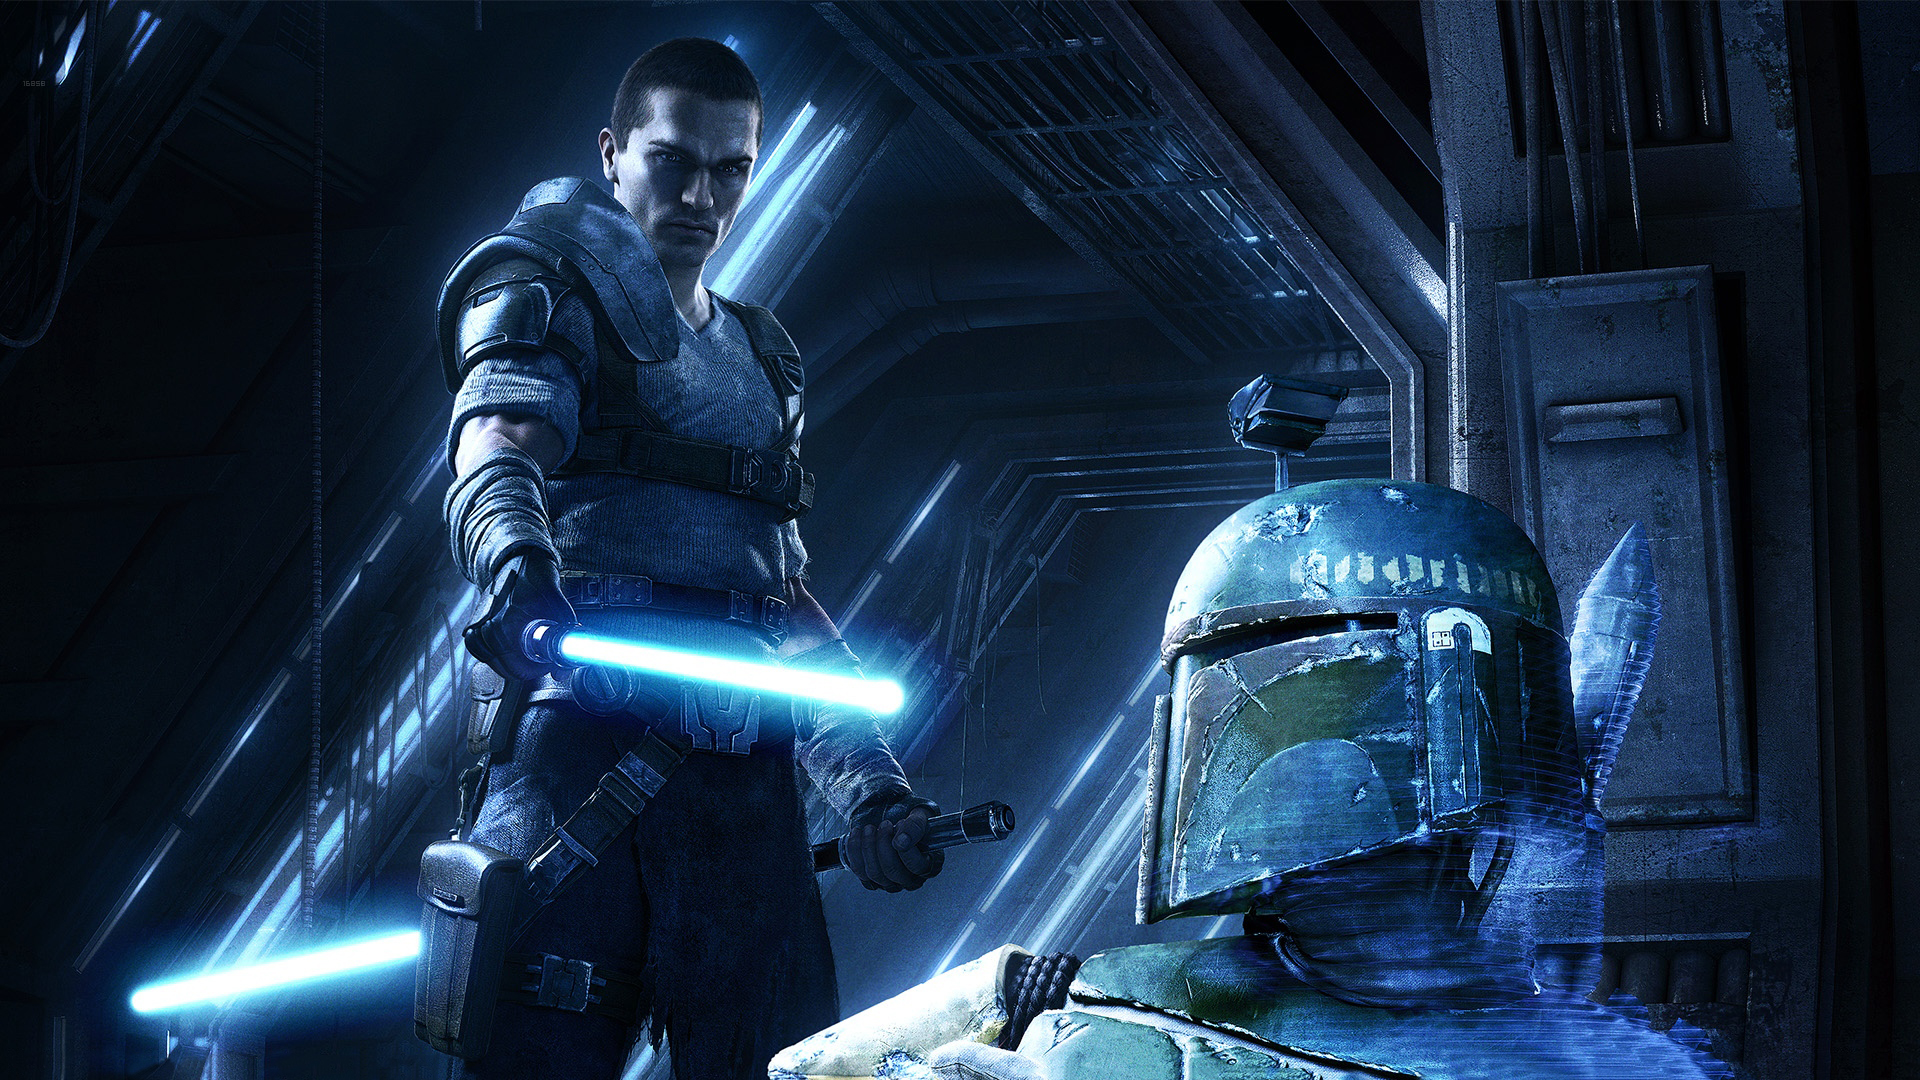 Video Game Star Wars The Force Unleashed Ii 1920x1080